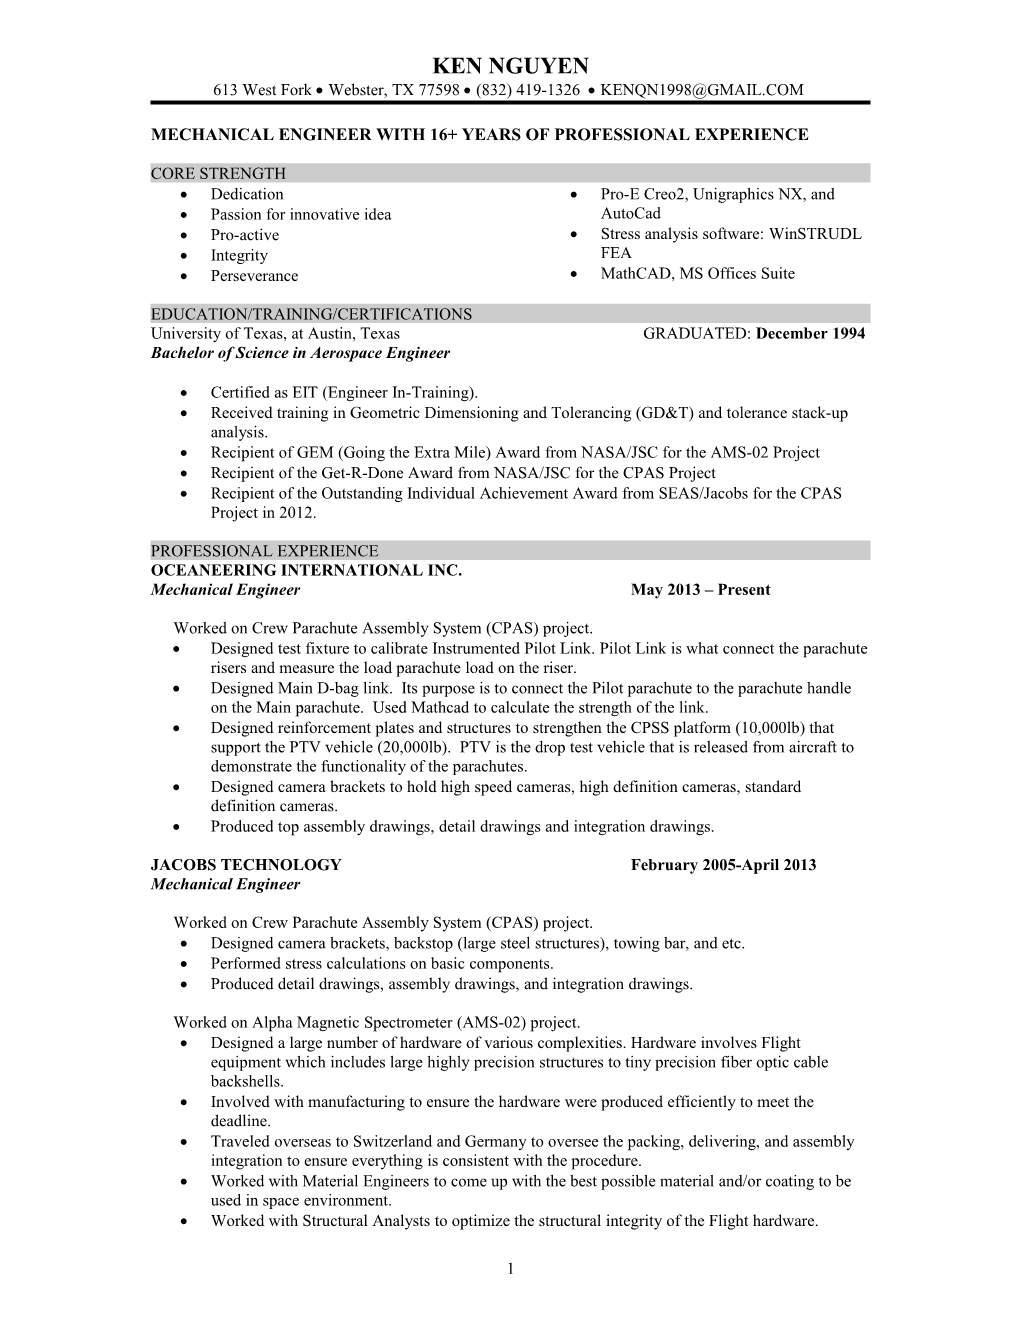 Mechanical Engineer with 16+ Years of Professional Experience